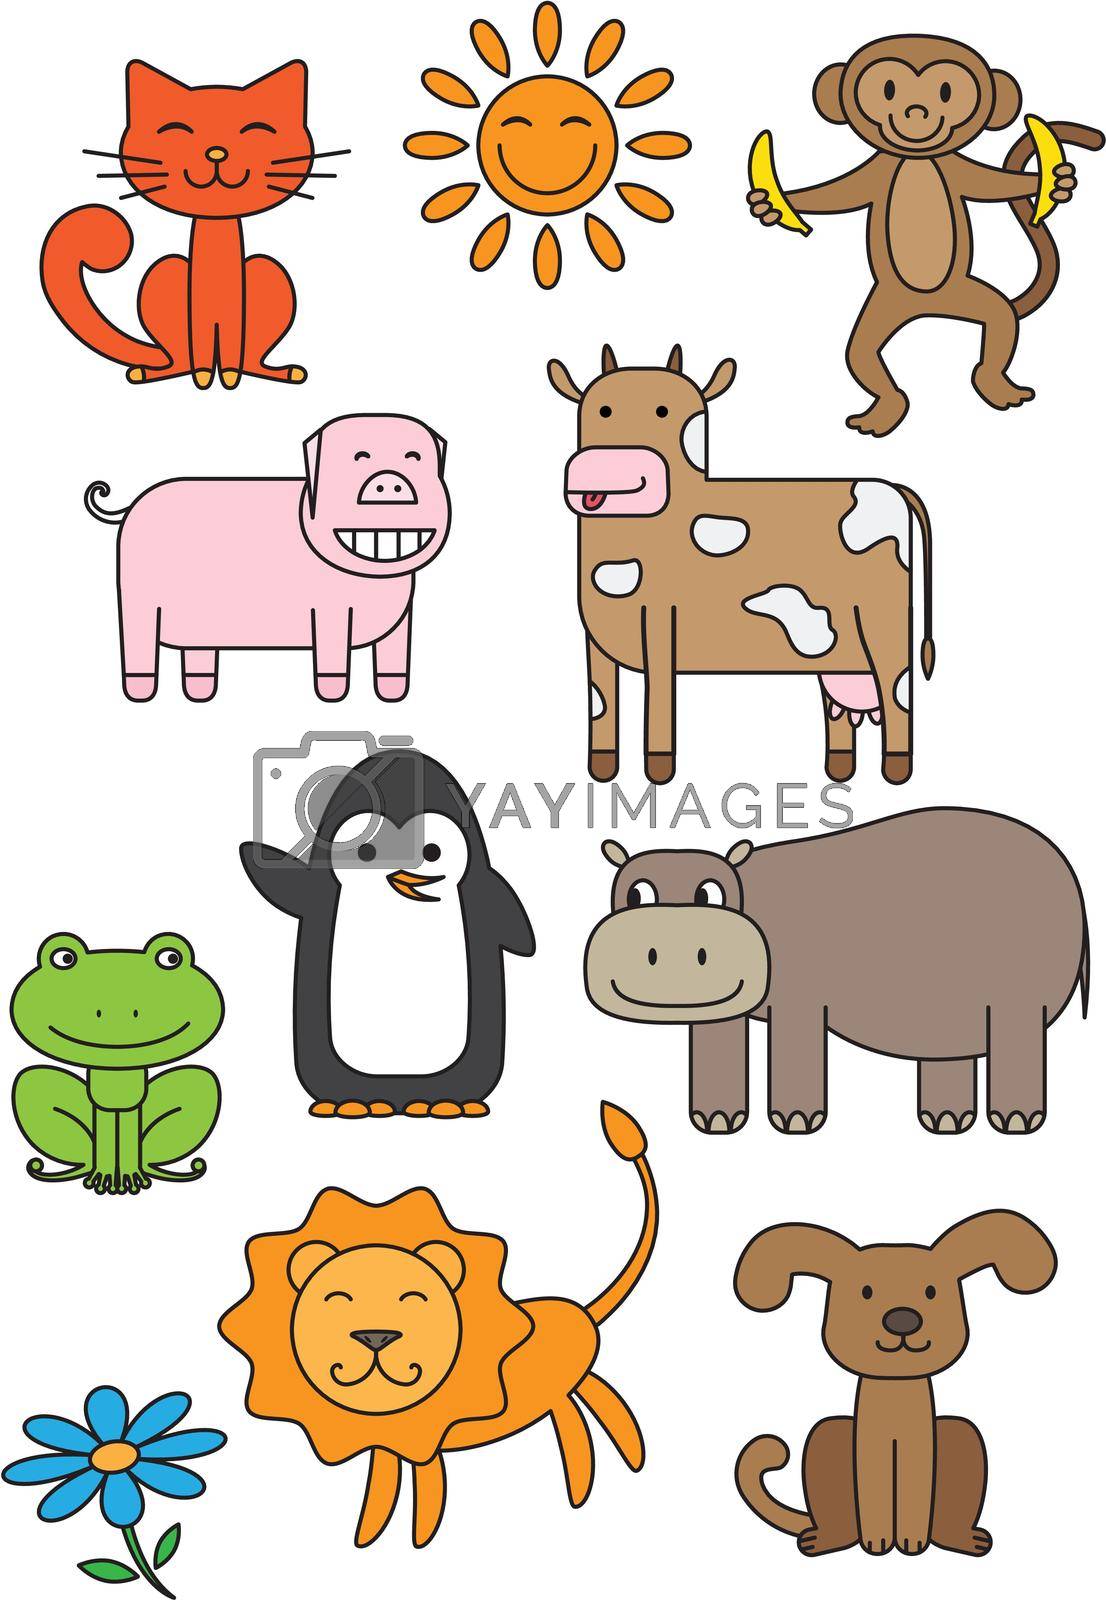 Cartoon animals characters set for children. Vector print ready A4 design